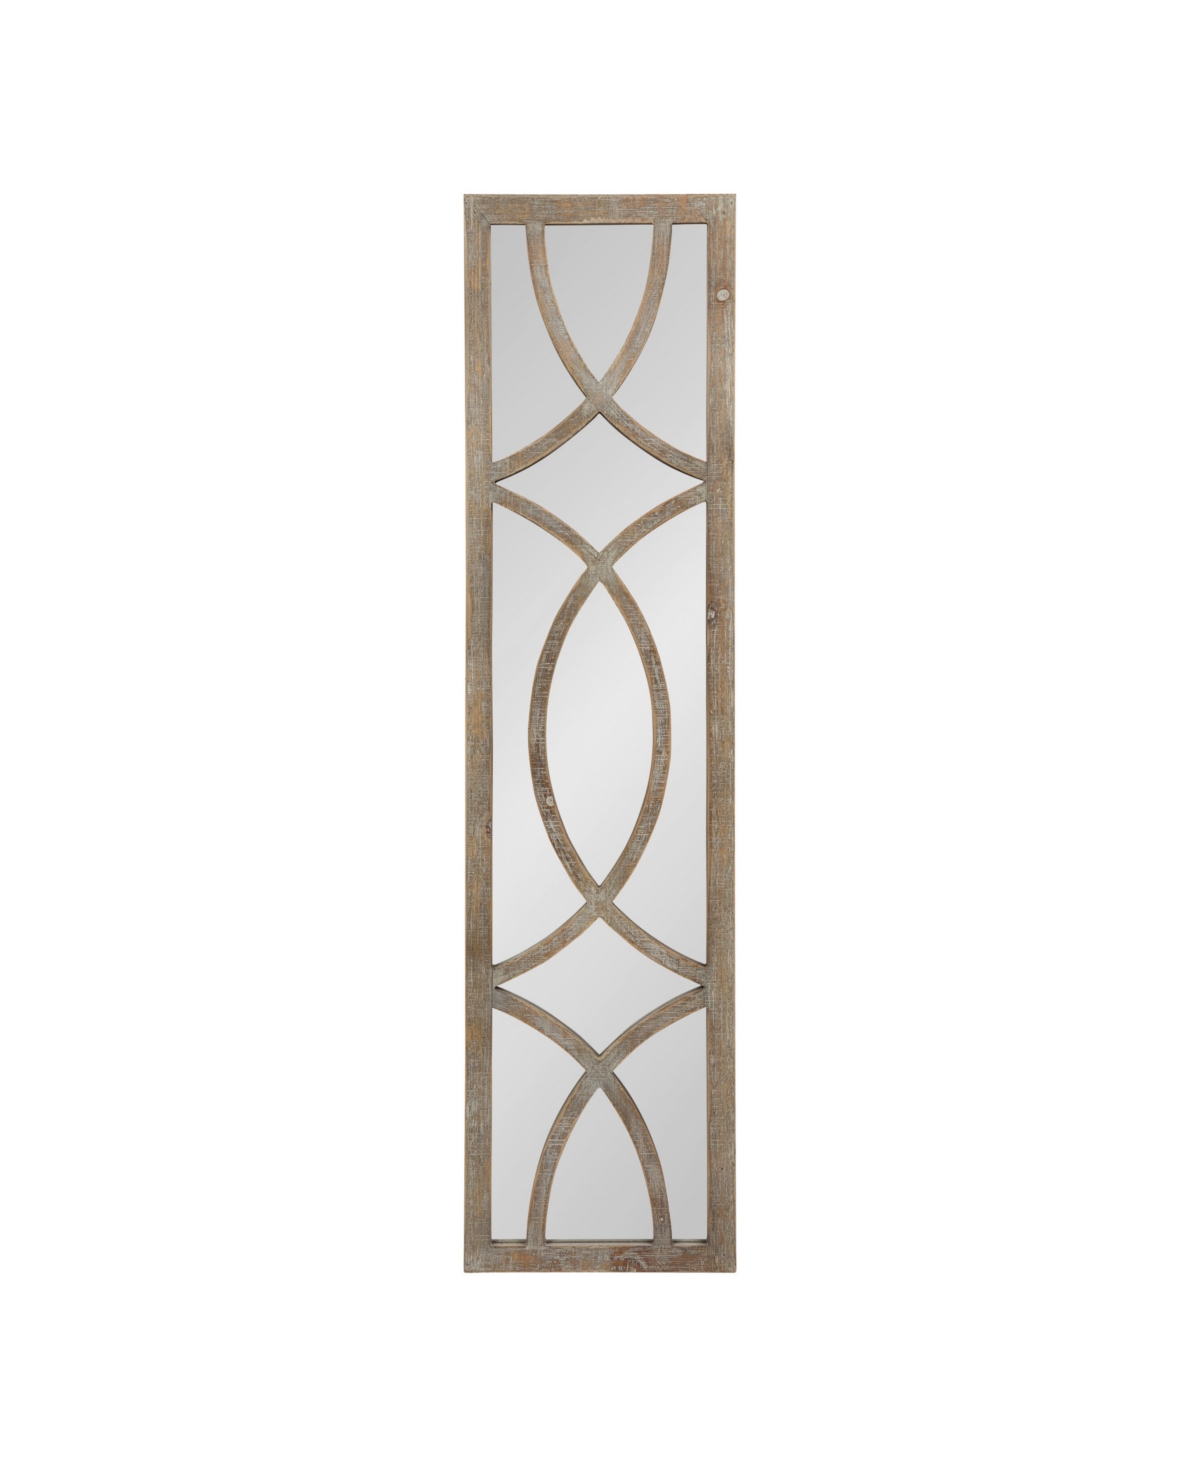 Tolland Wood Panel Wall Mirror - Brown